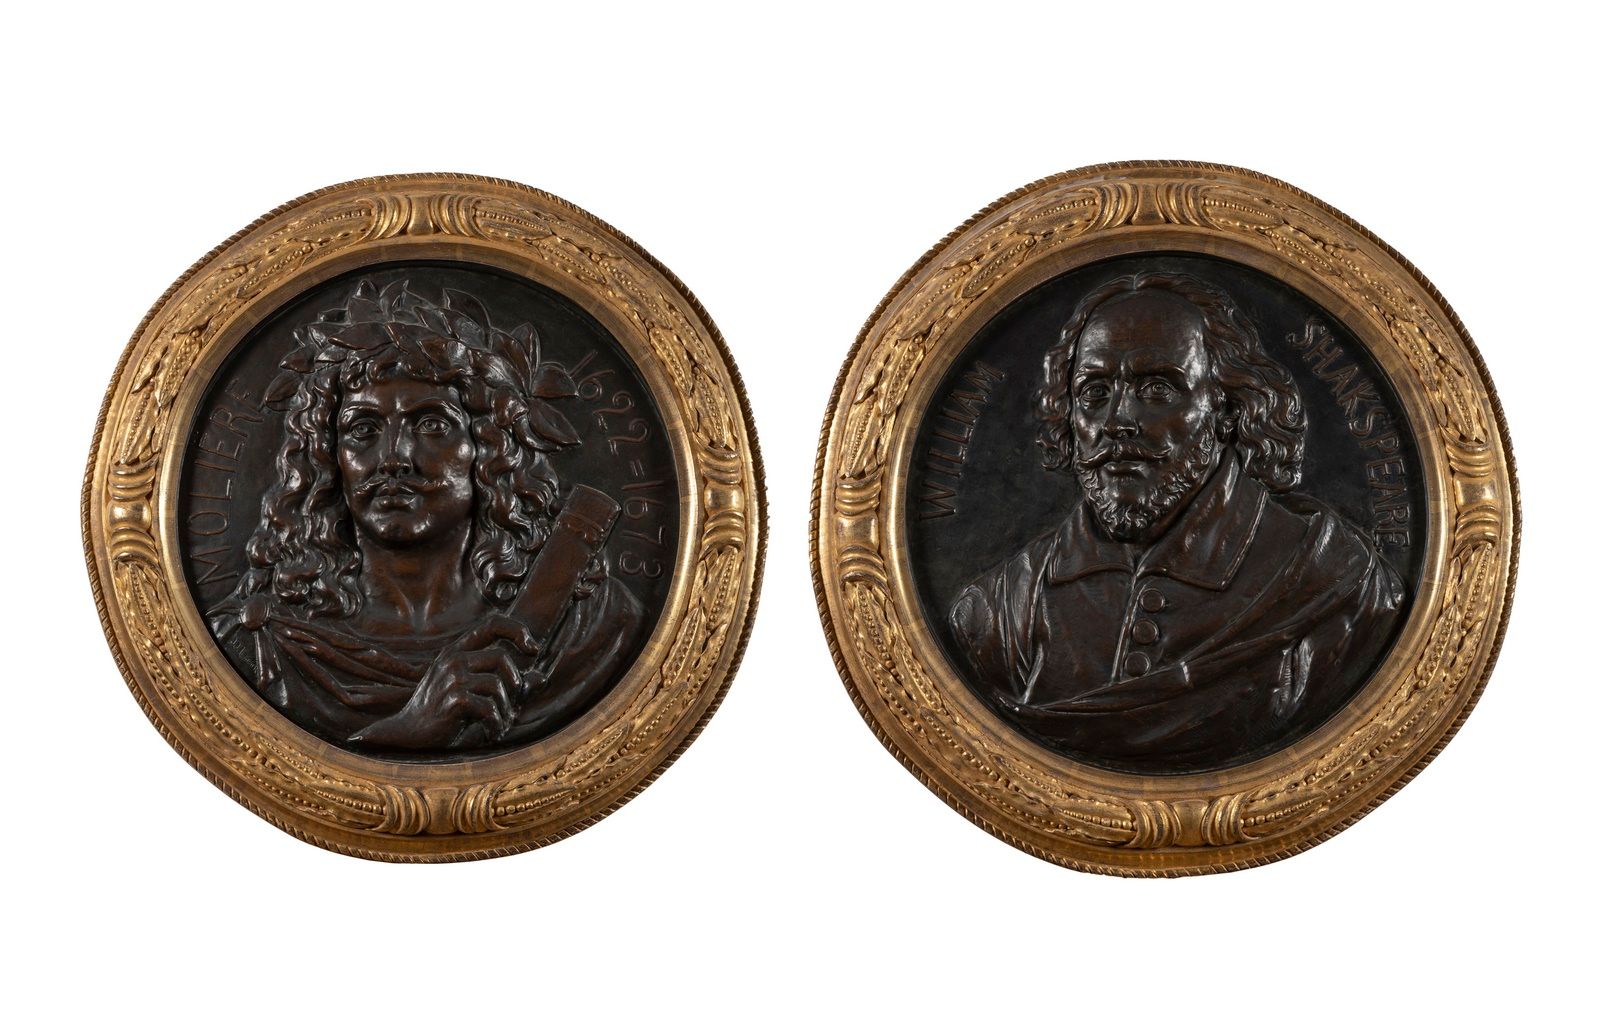 Null School of the XIXth century
"Molière" and "Shakespeare
Pair of medallions i&hellip;